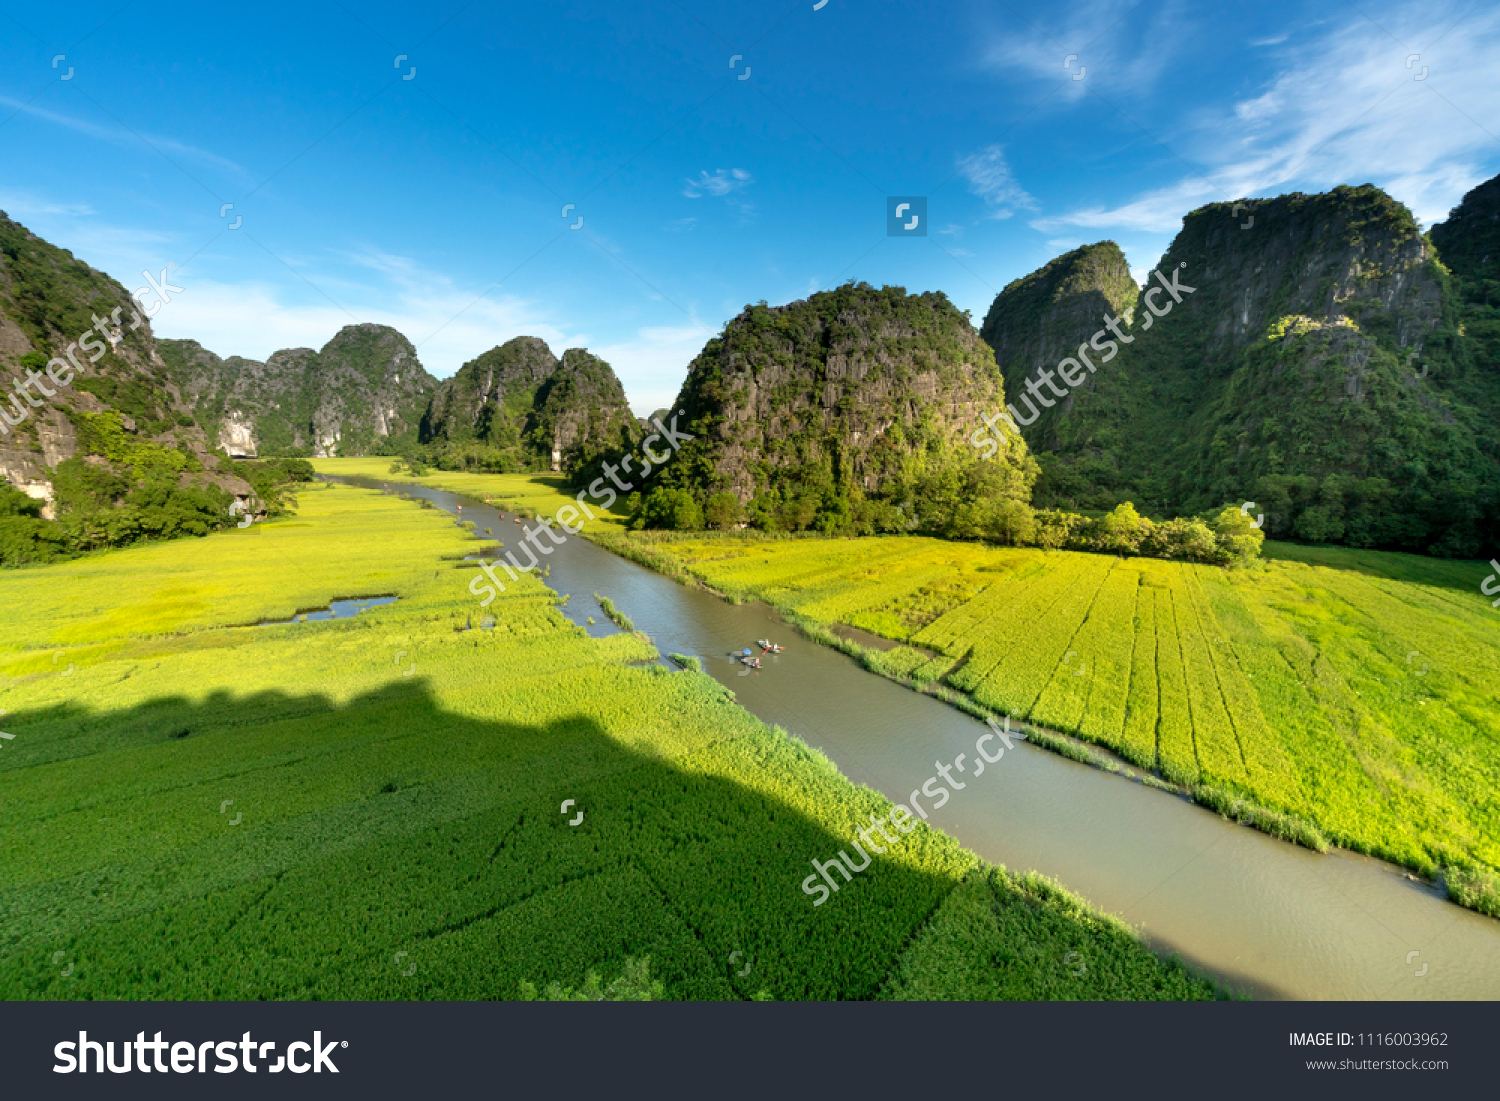 the majestic scenery on Ngo Dong river in Tam Coc Bich Dong view from the mountain top in Ninh Binh province of Viet Nam
 #1116003962